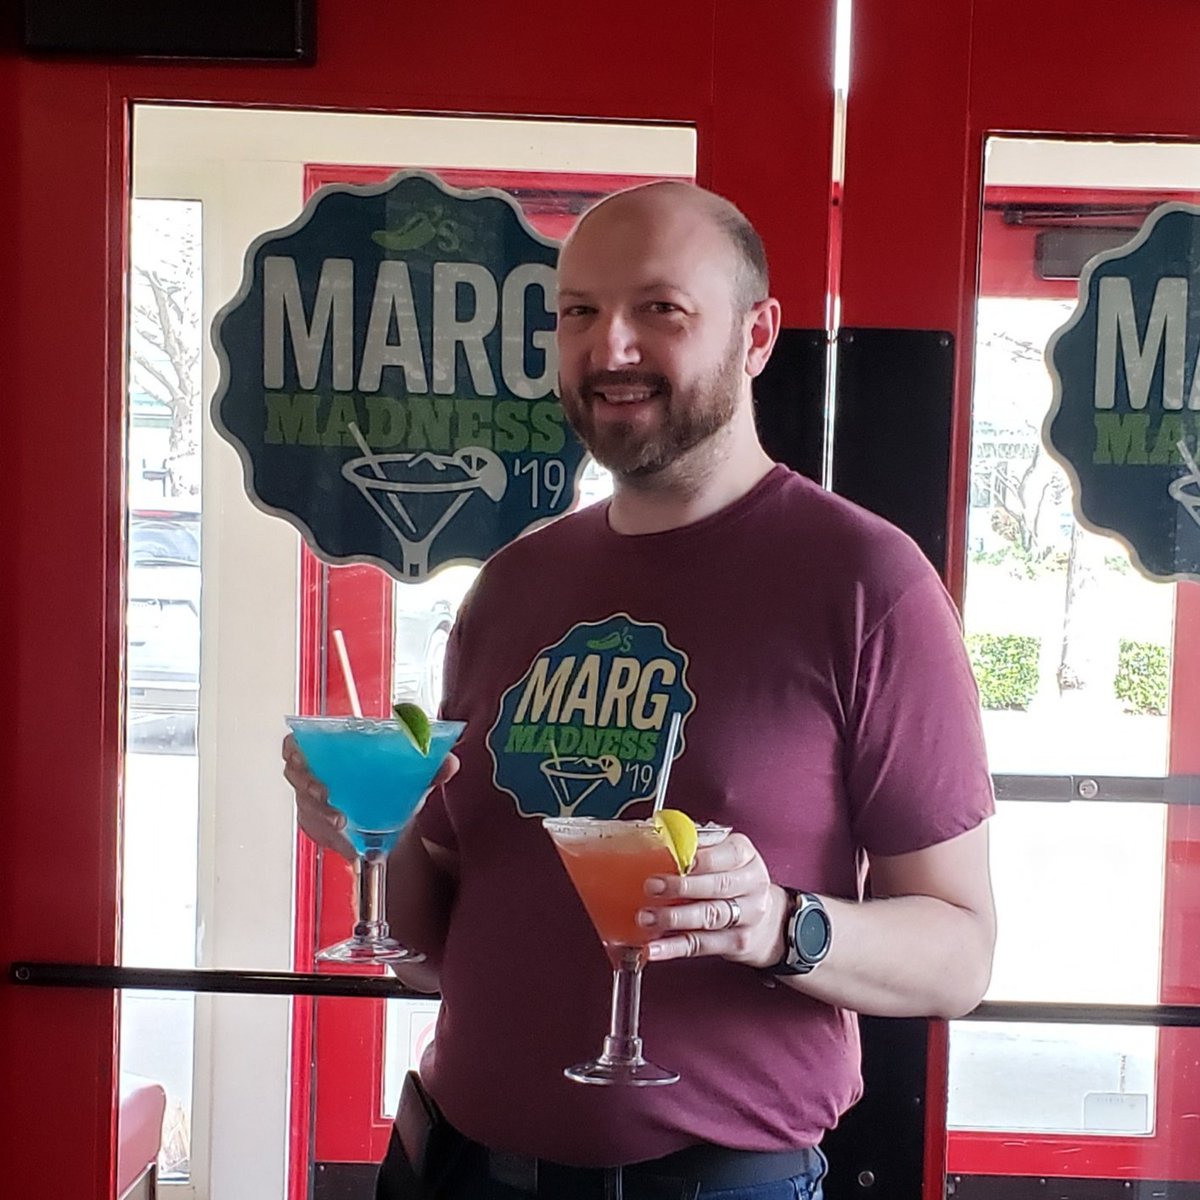 Are you ready for the madness? @Chilis #MargaritaMadness